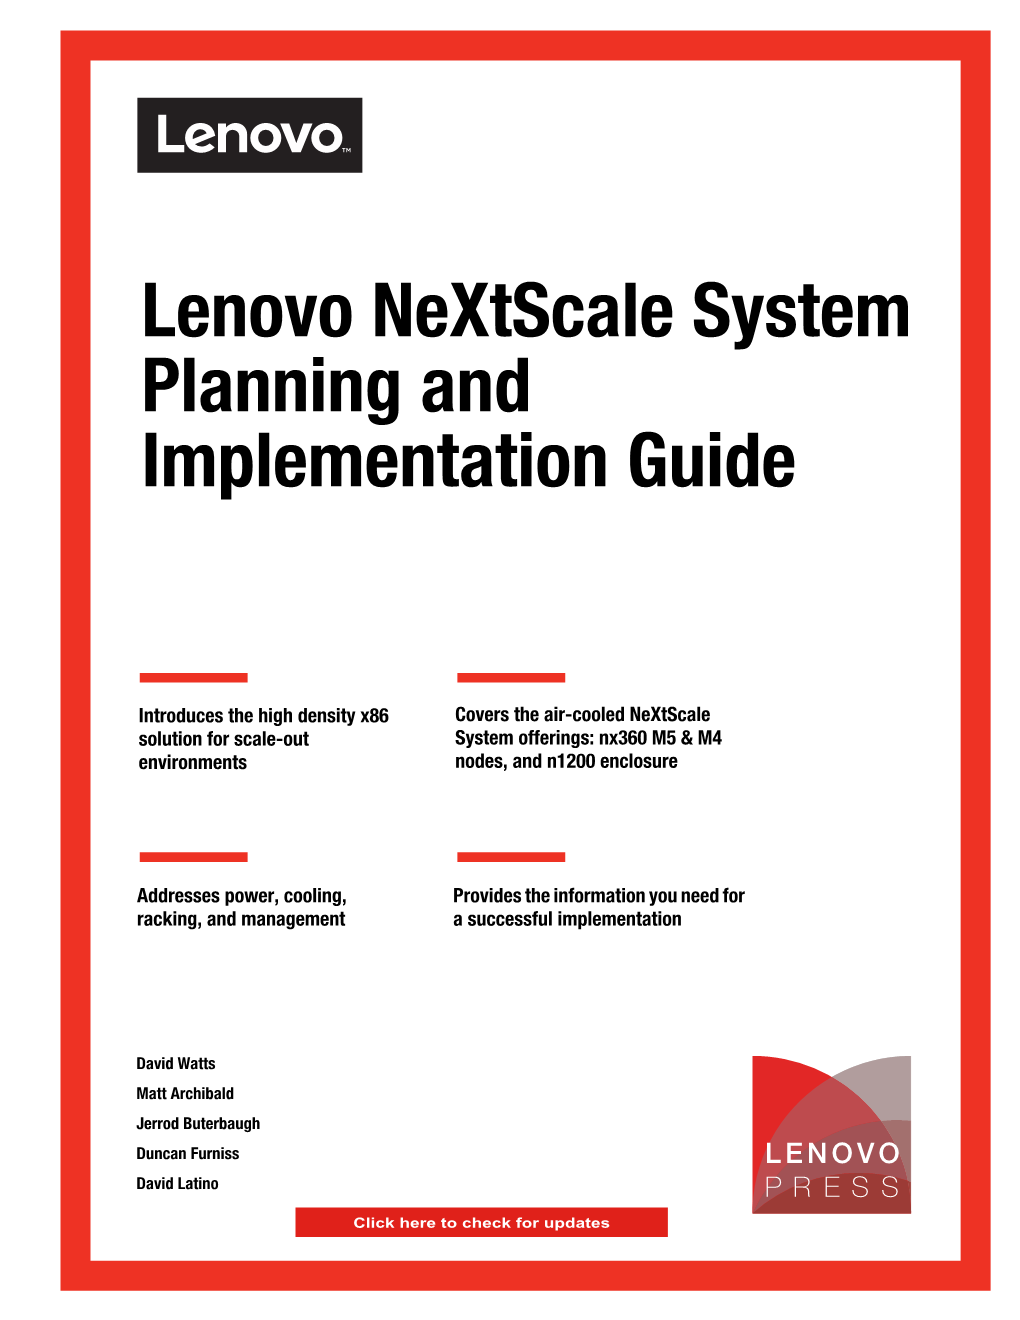 Lenovo Nextscale System Planning and Implementation Guide